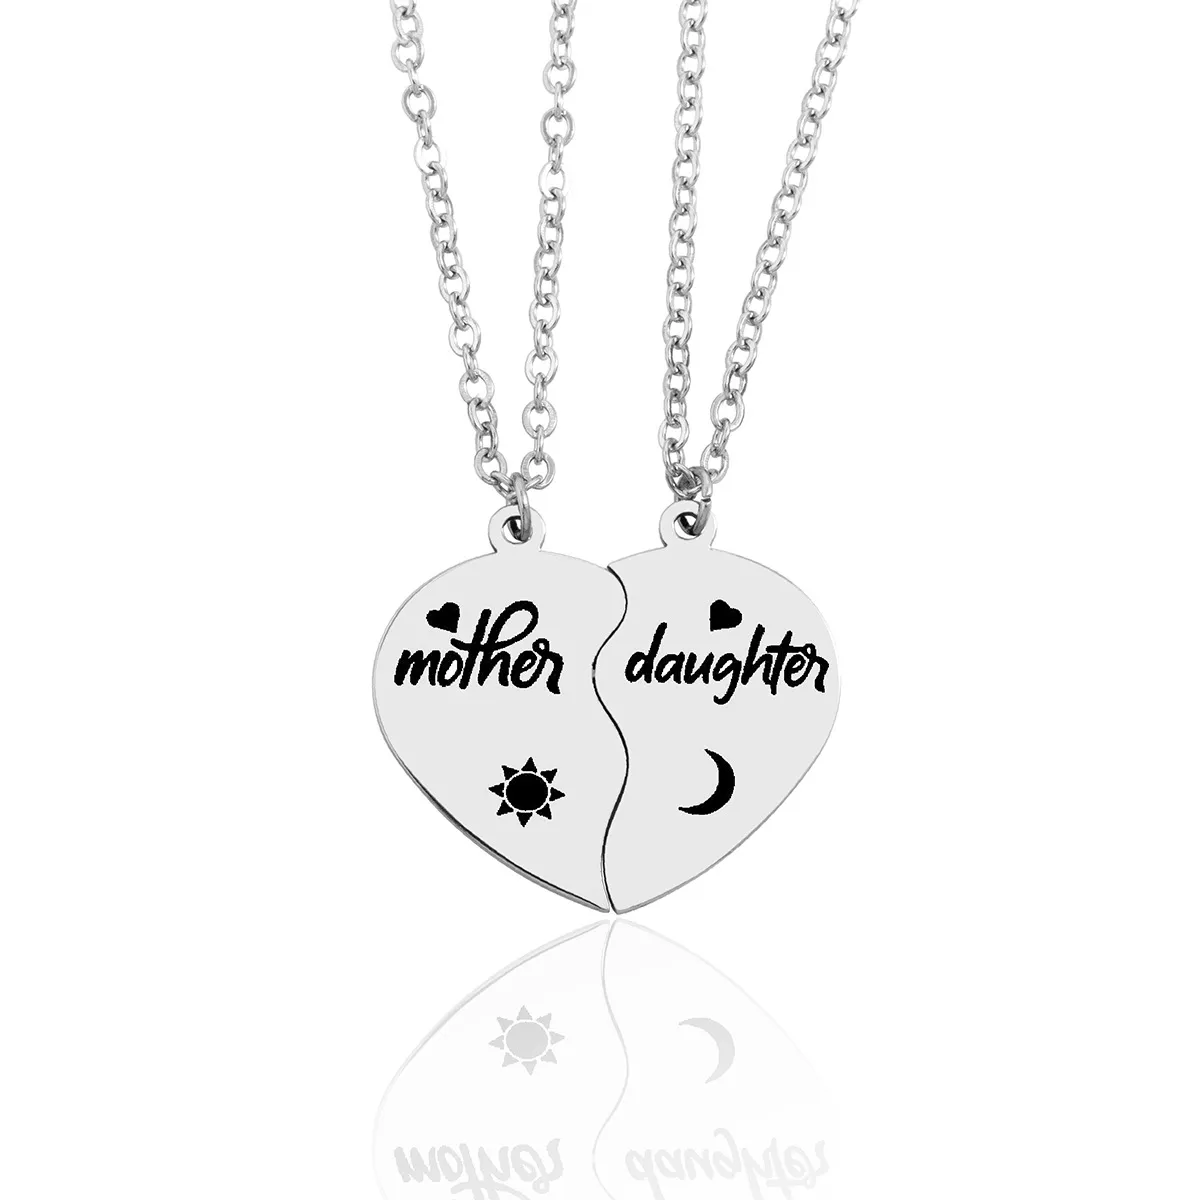 Pendant Necklaces Pendants Jewelry Diamond Peach Heart Mothers Day Gift Family Daughter Sister Crystal Necklace Drop Delivery 2021 Othxt